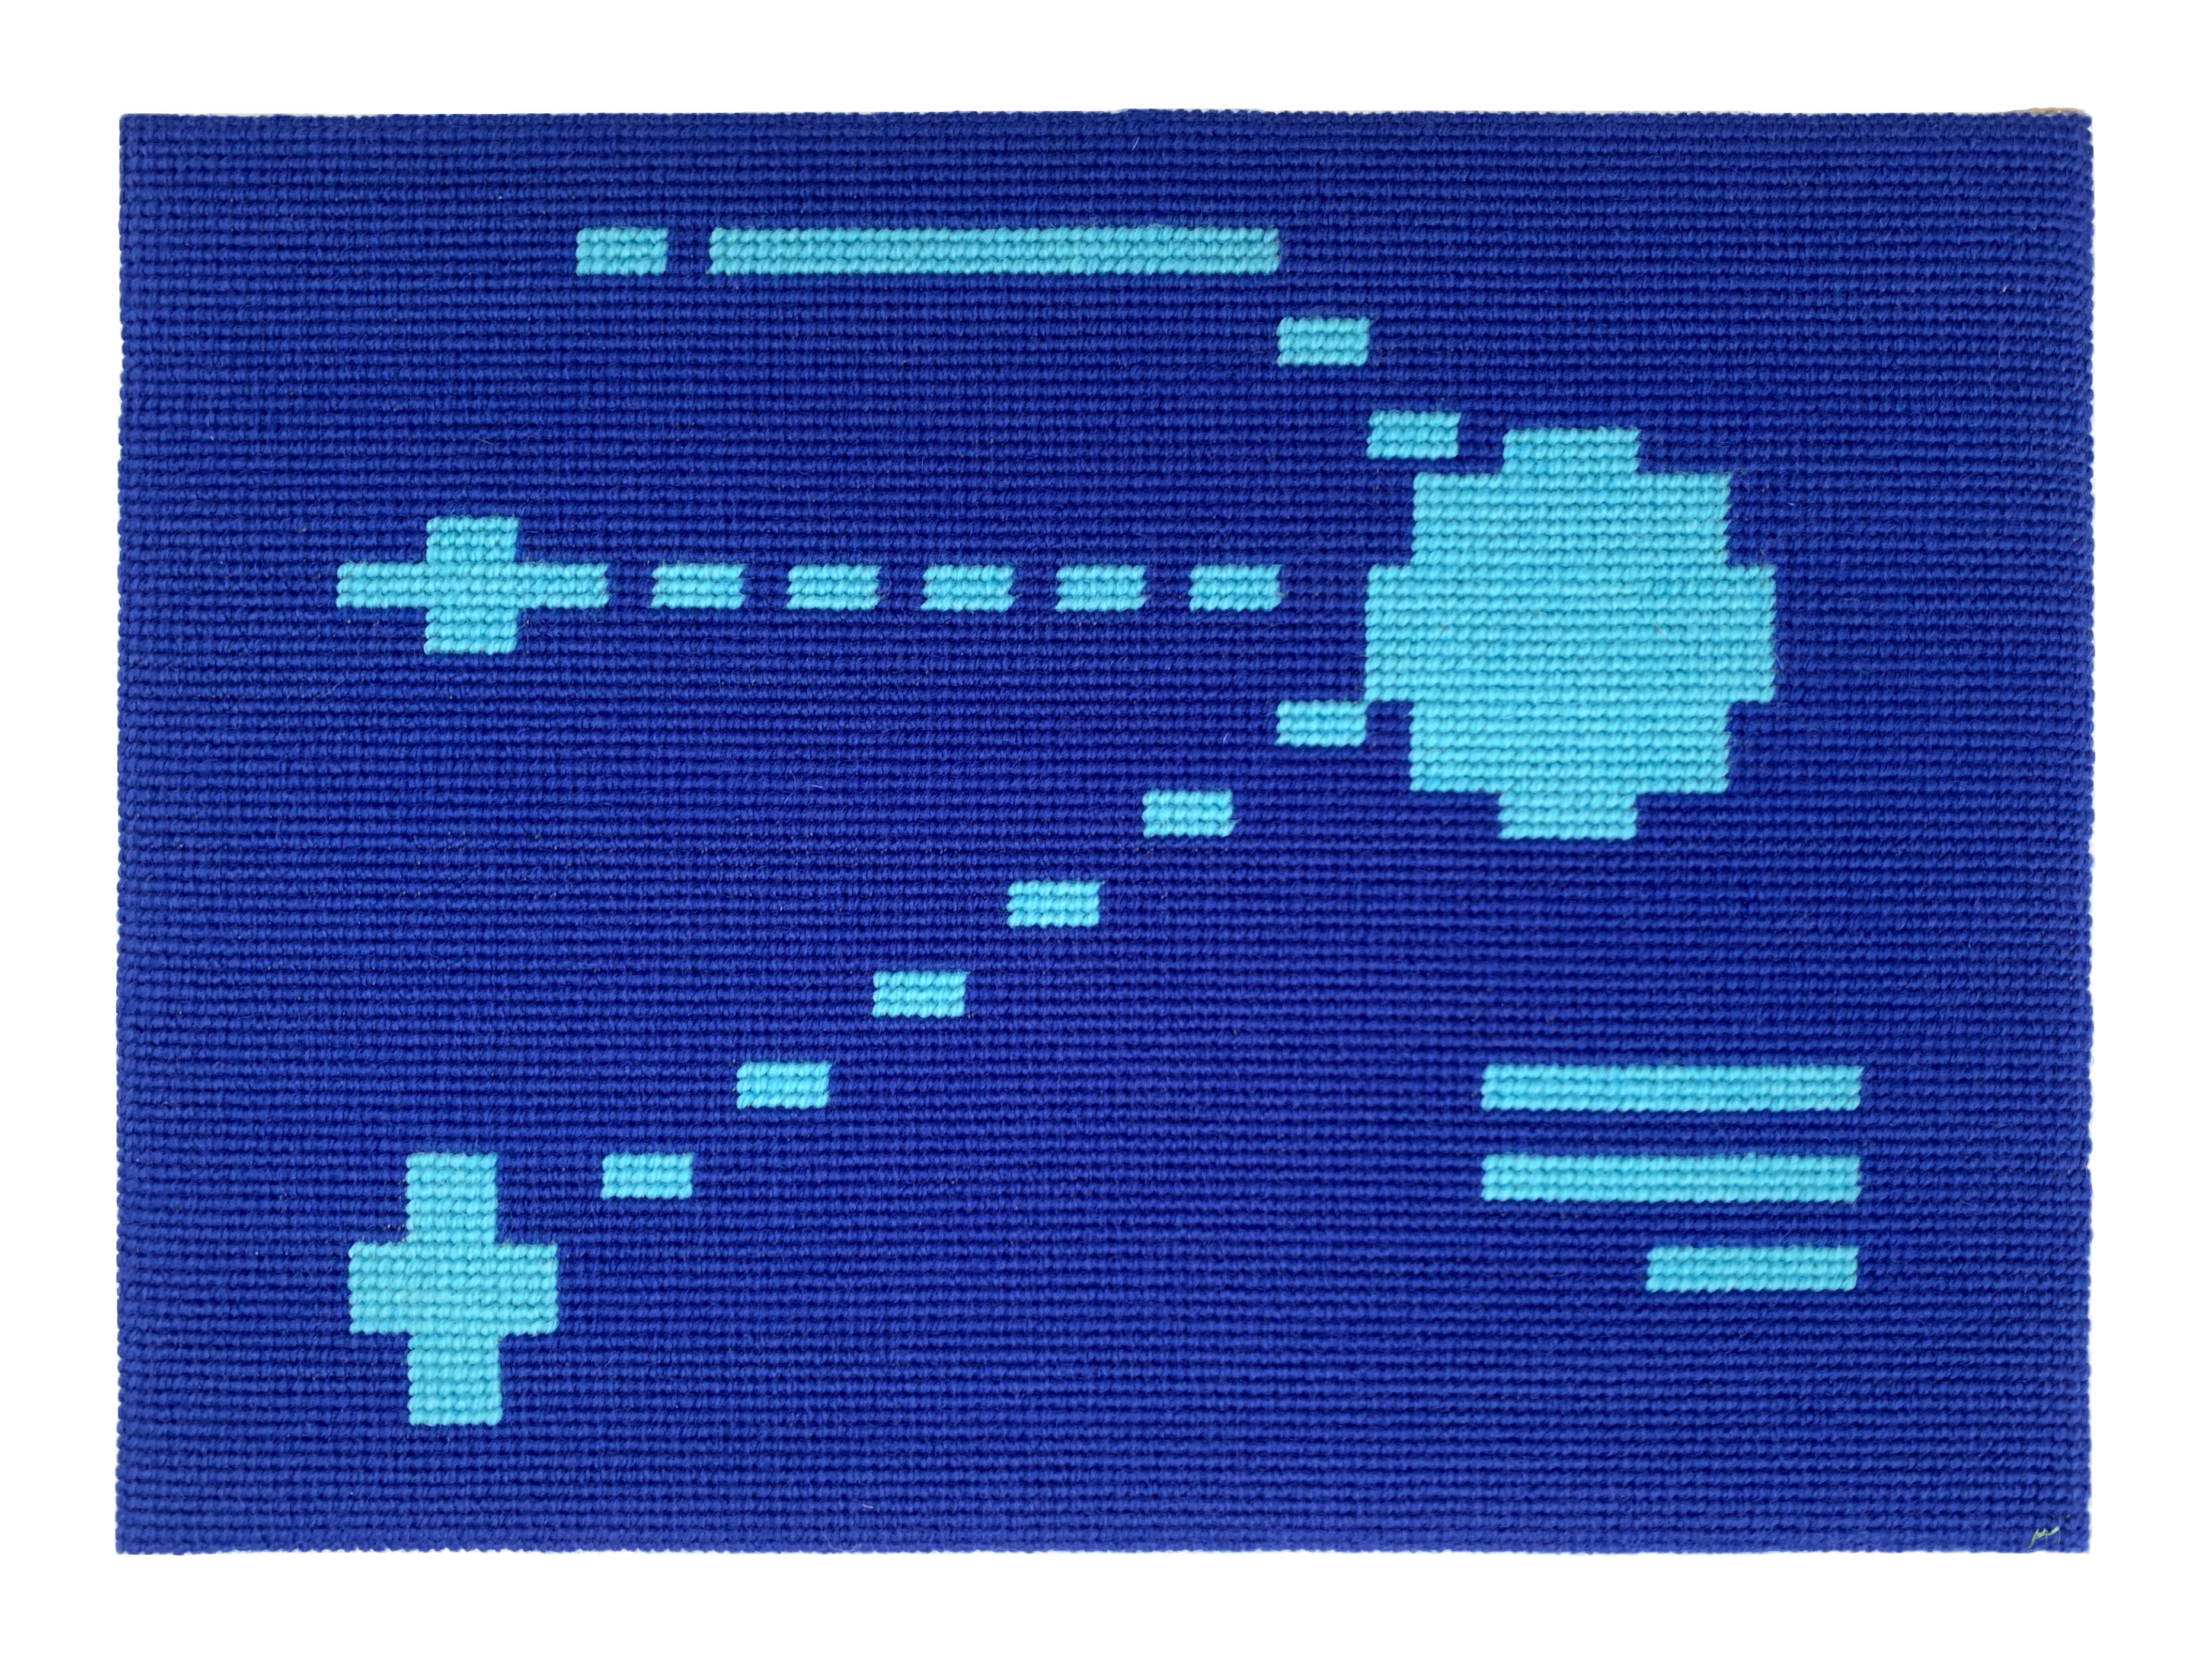  / Needlepoint of a poster in the telescope room from *Maniac Mansion*—video game conceived by Ron Gilbert and Gary Winnick—in its C64 version. Art by artist Marine Beaufils.